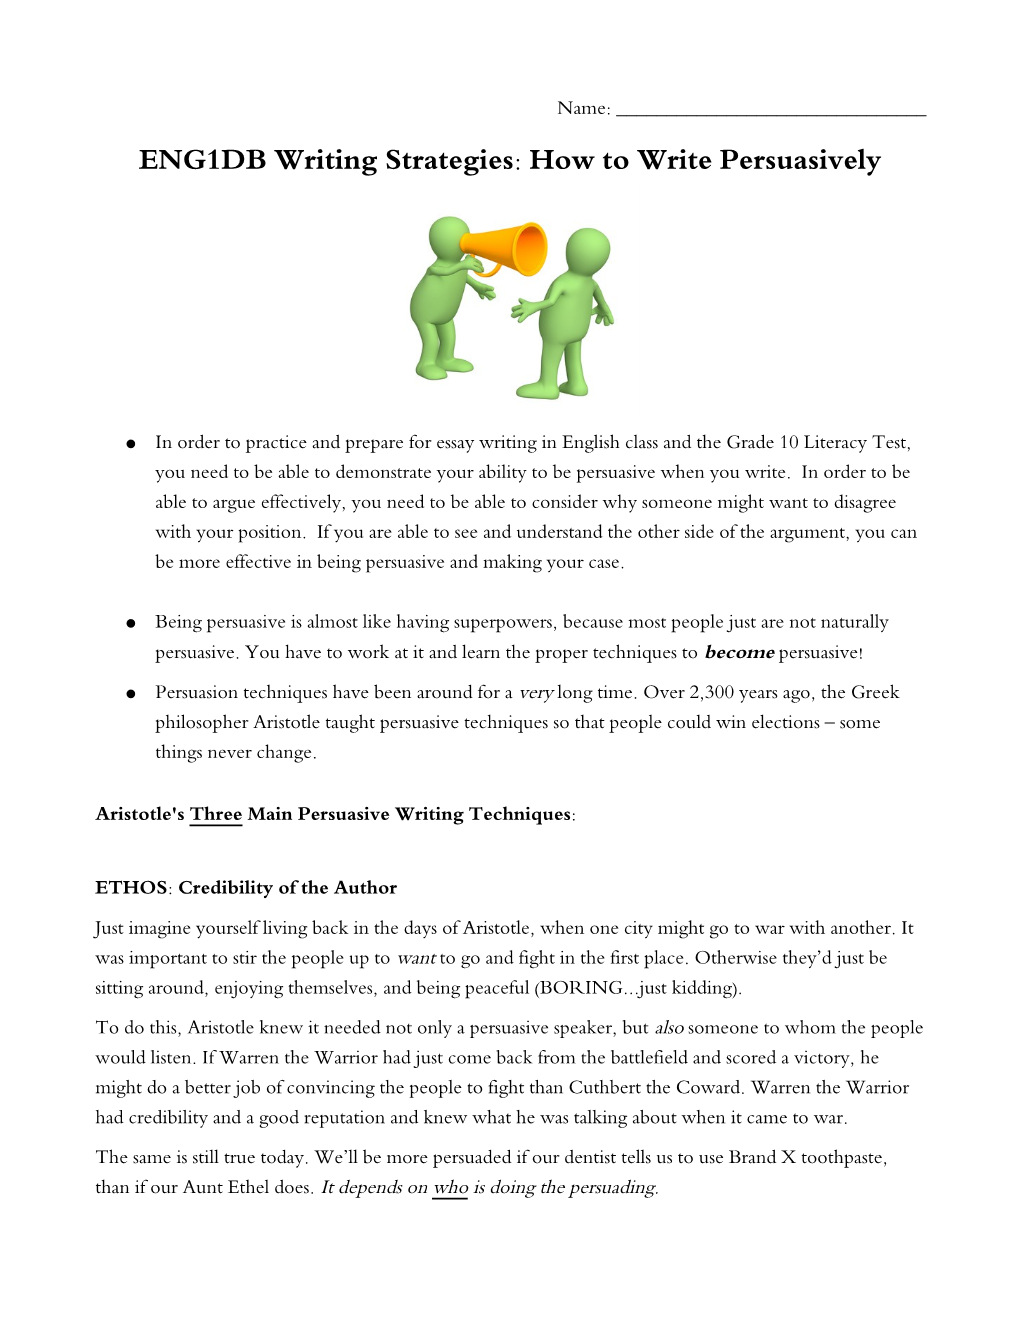 ENG1DB Writing Strategies: How to Write Persuasively